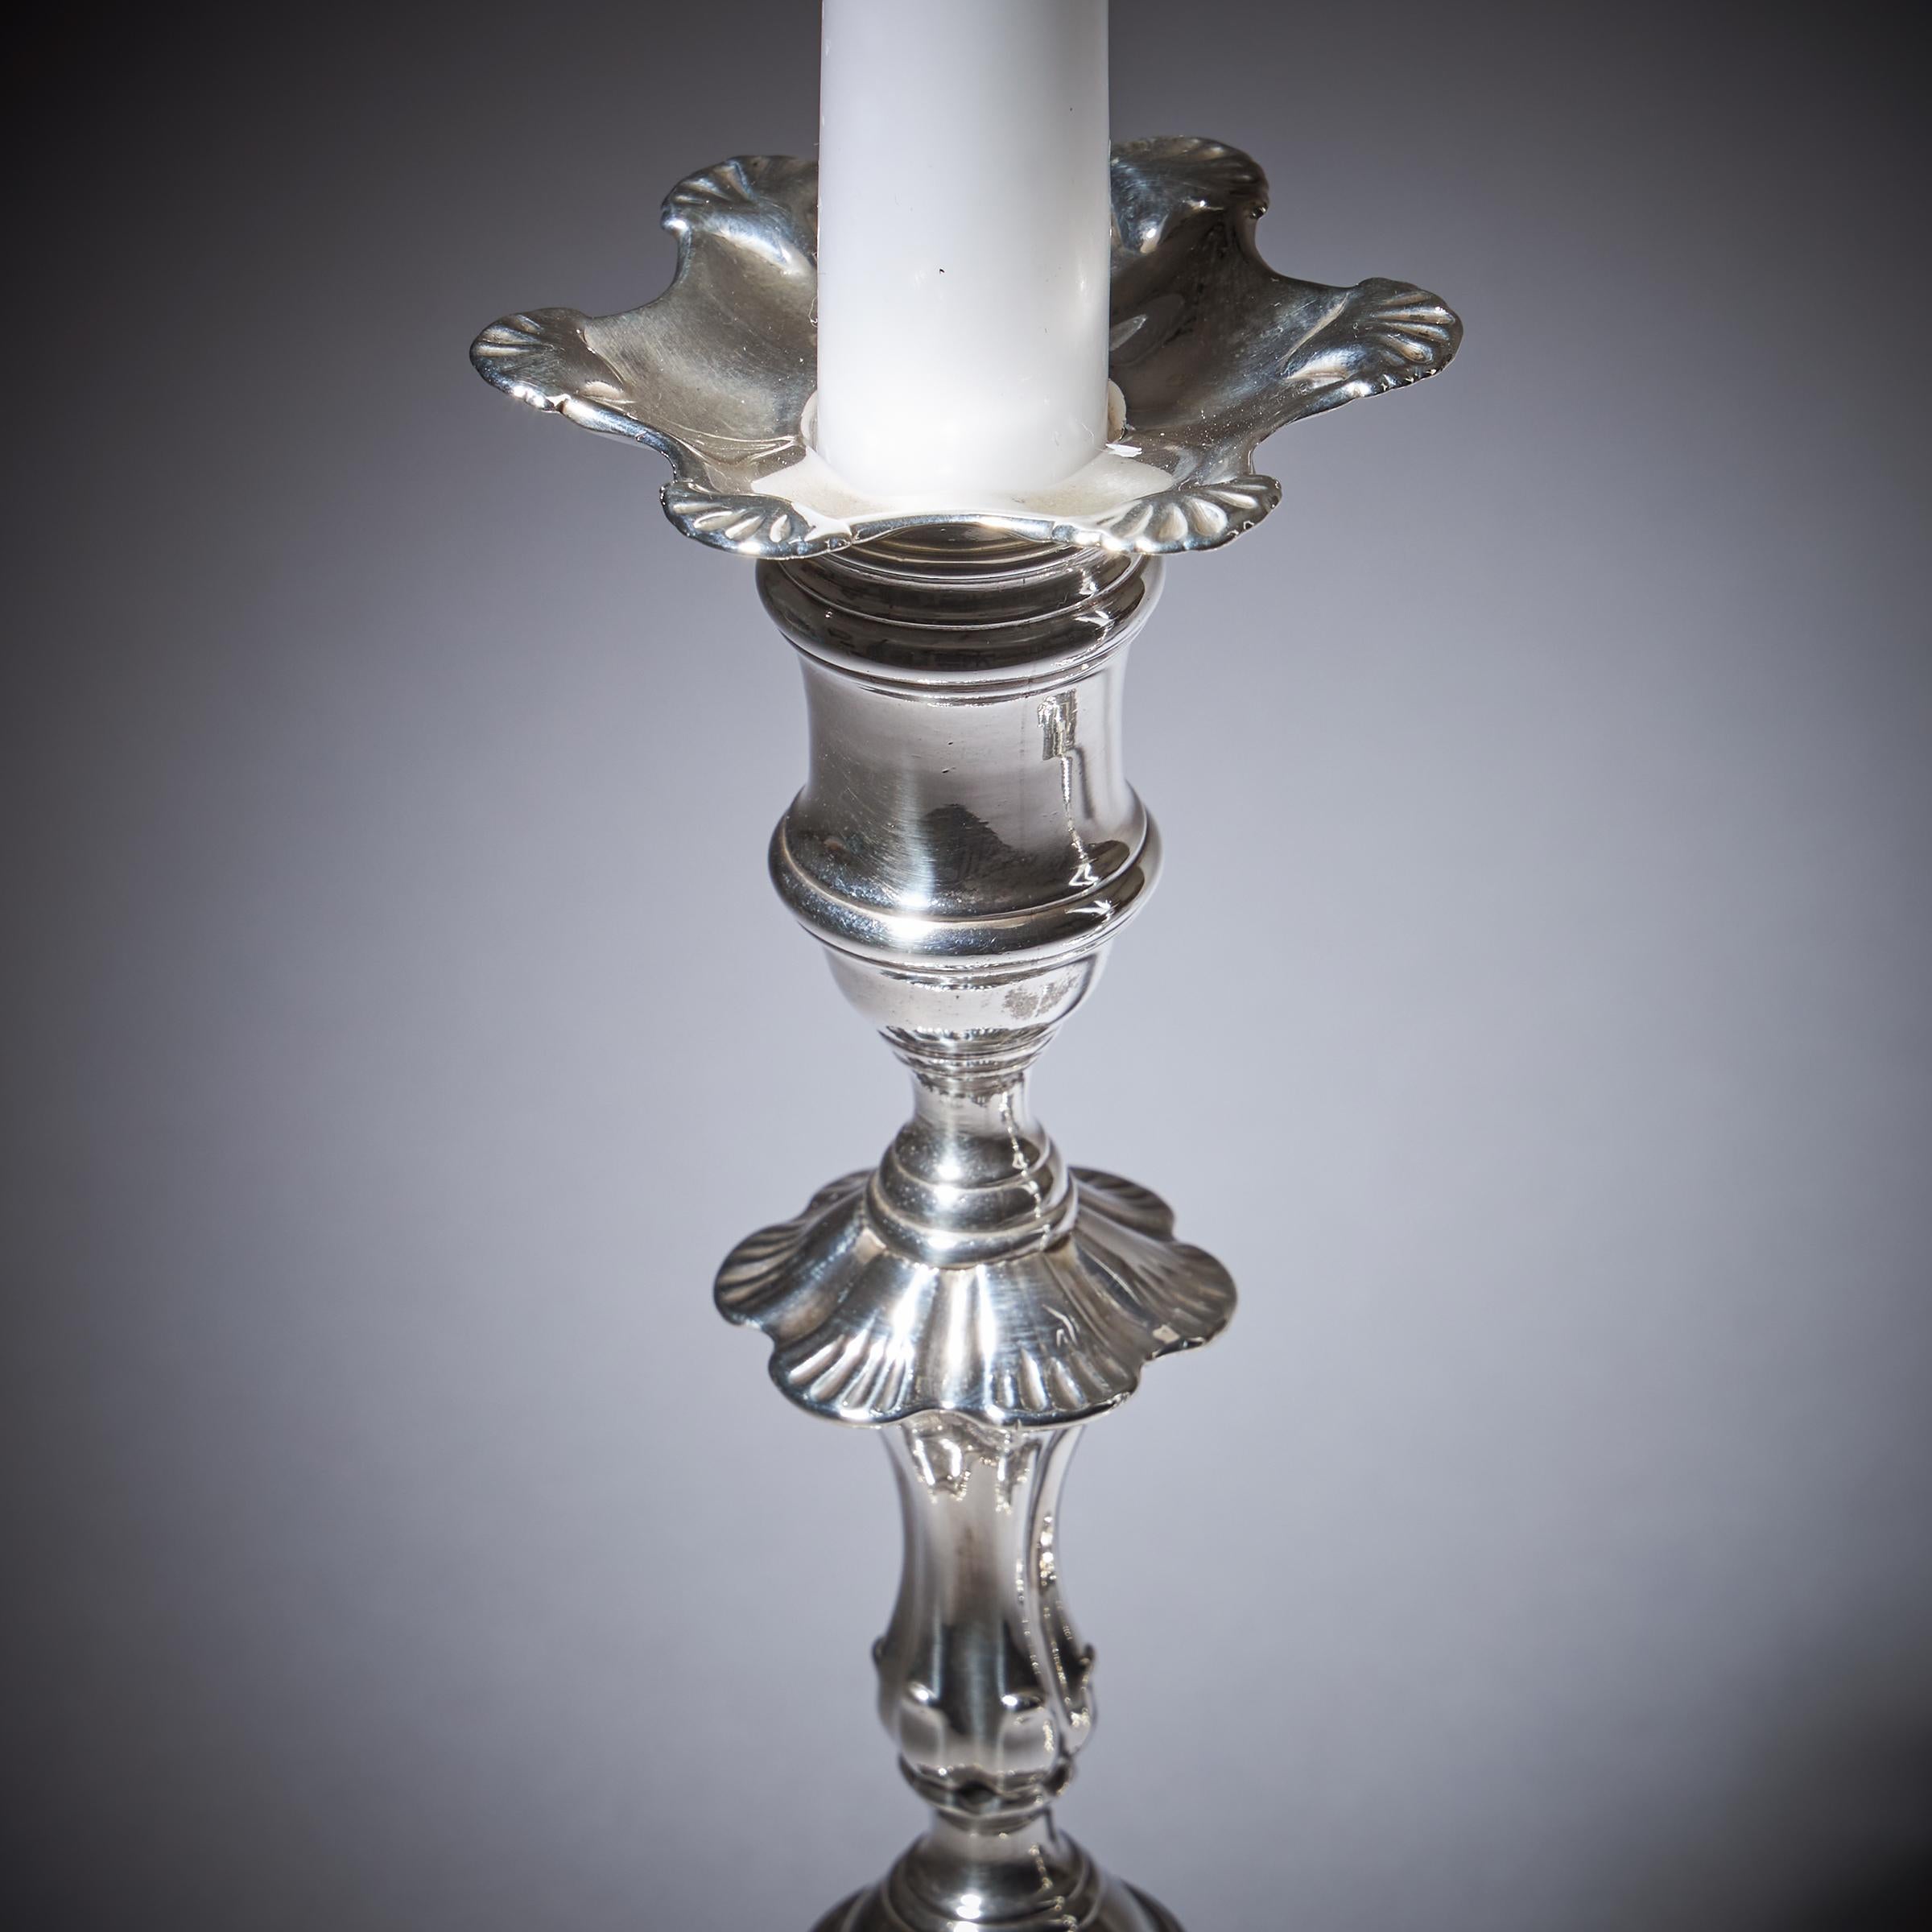 A Pair of 18th Century George II Silver Candlesticks by John Cafe, London 1751 4